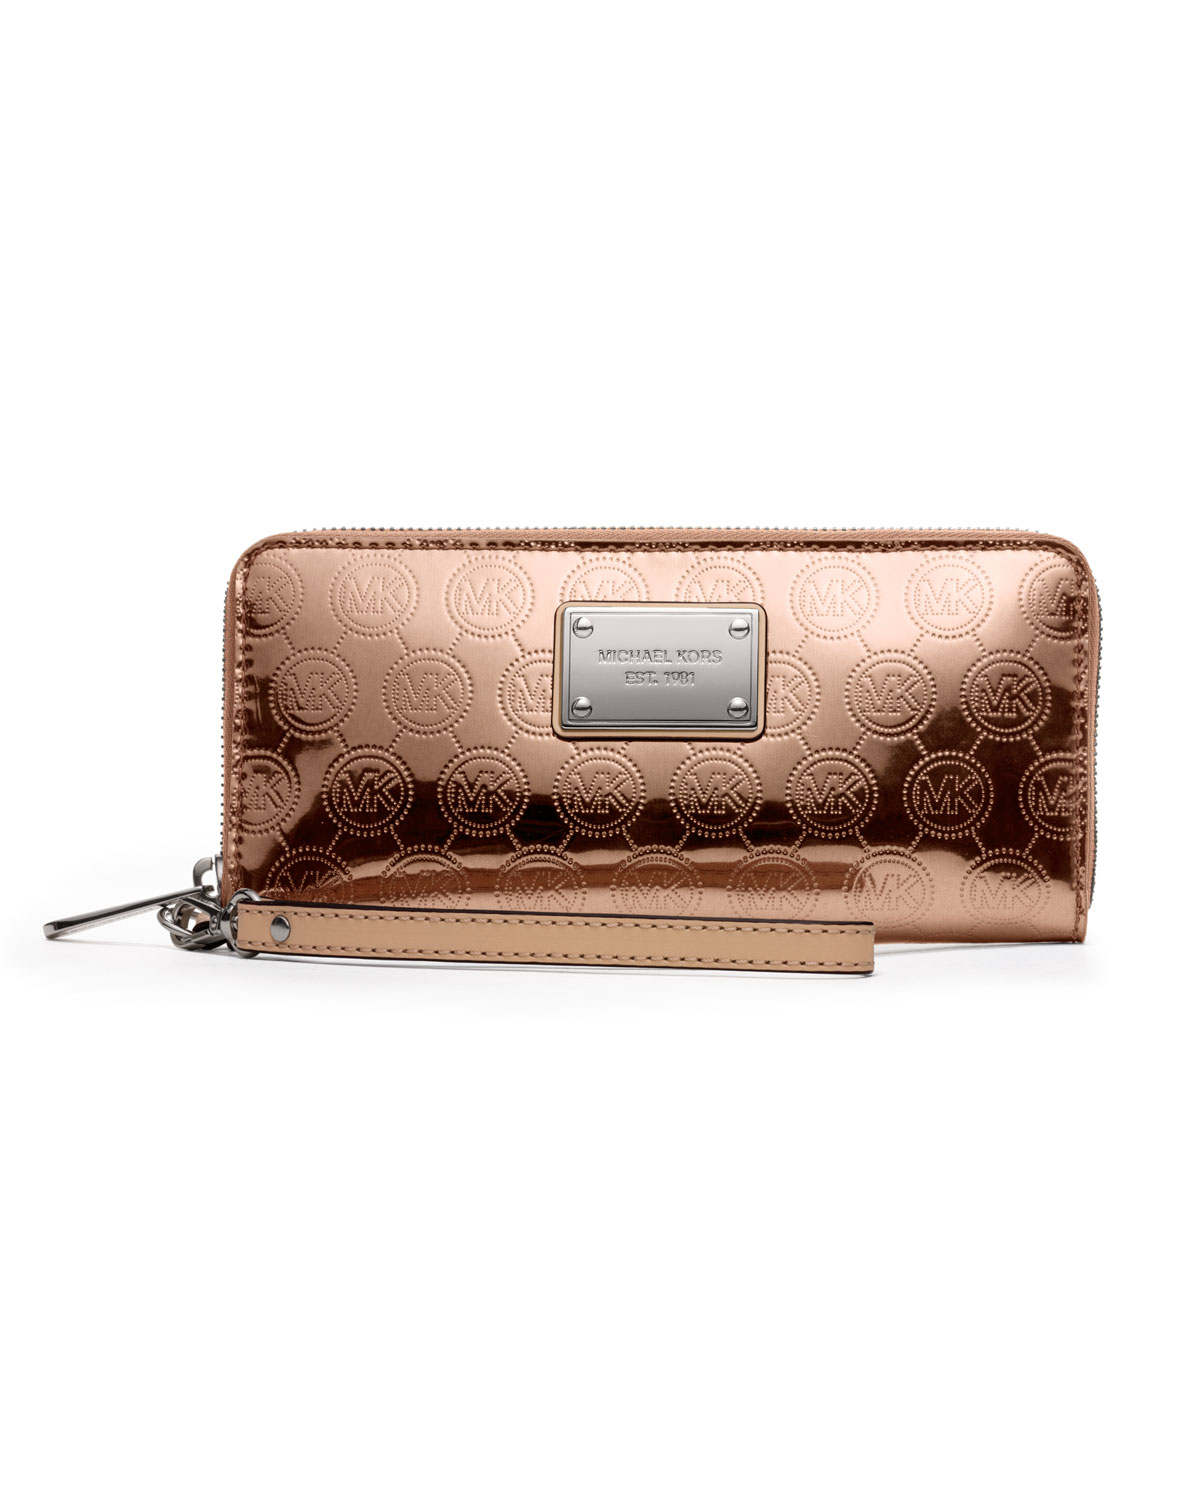 Michael Kors Iphone 5 Continental Wallet in Pink (ROSE GOLD)